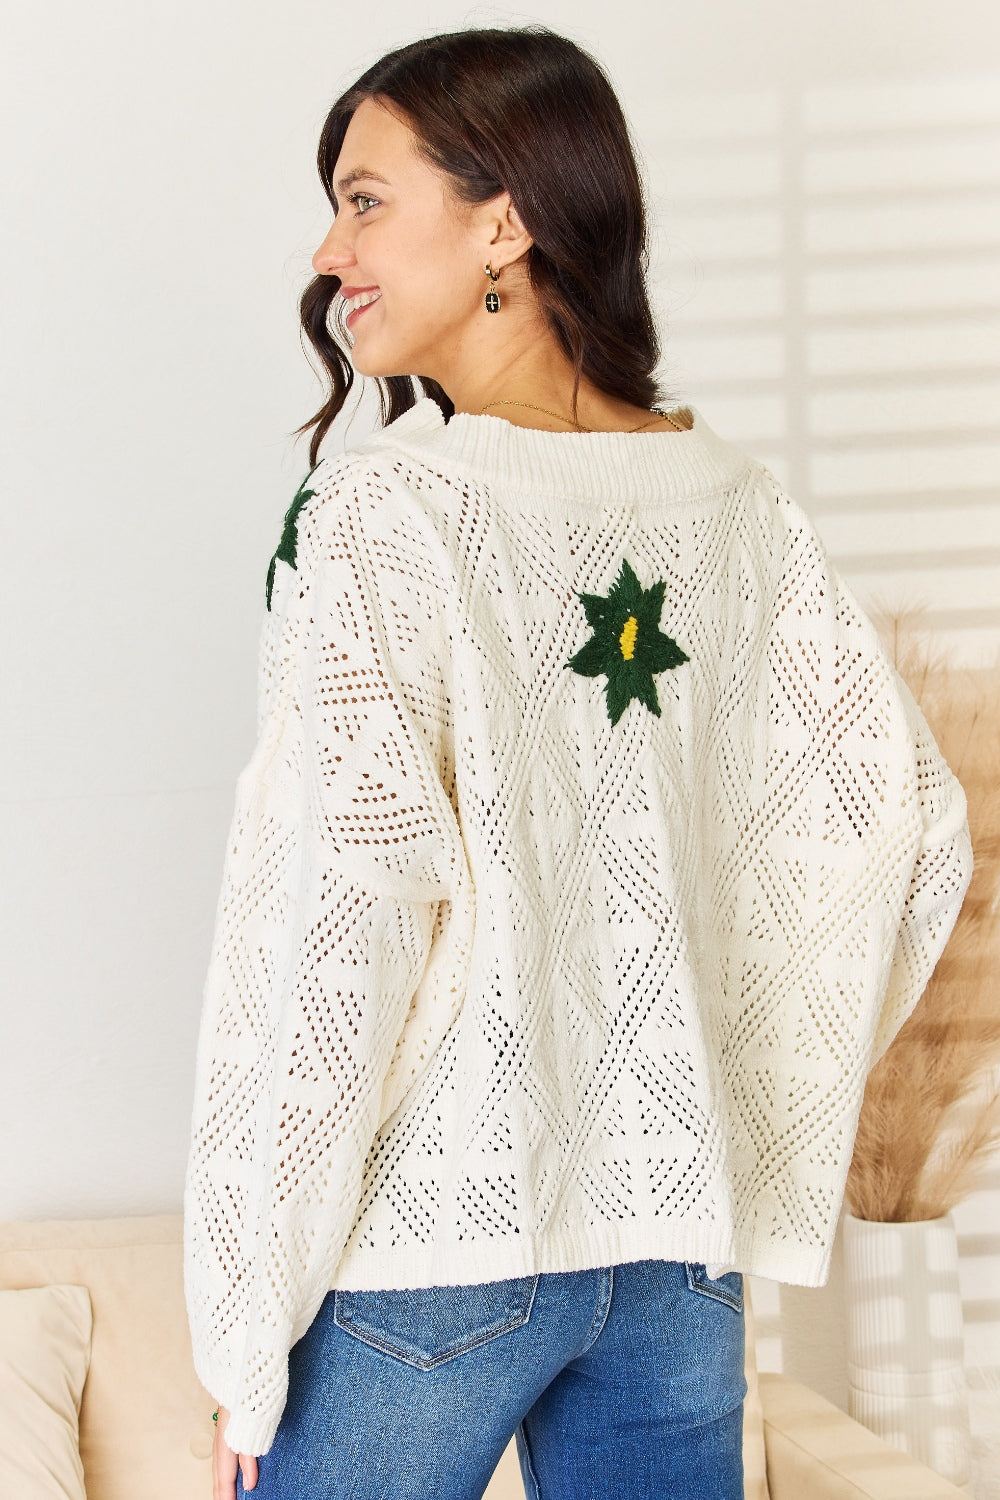 POL Sweater - Embroidered Floral Sweater - Inspired Eye Boutique